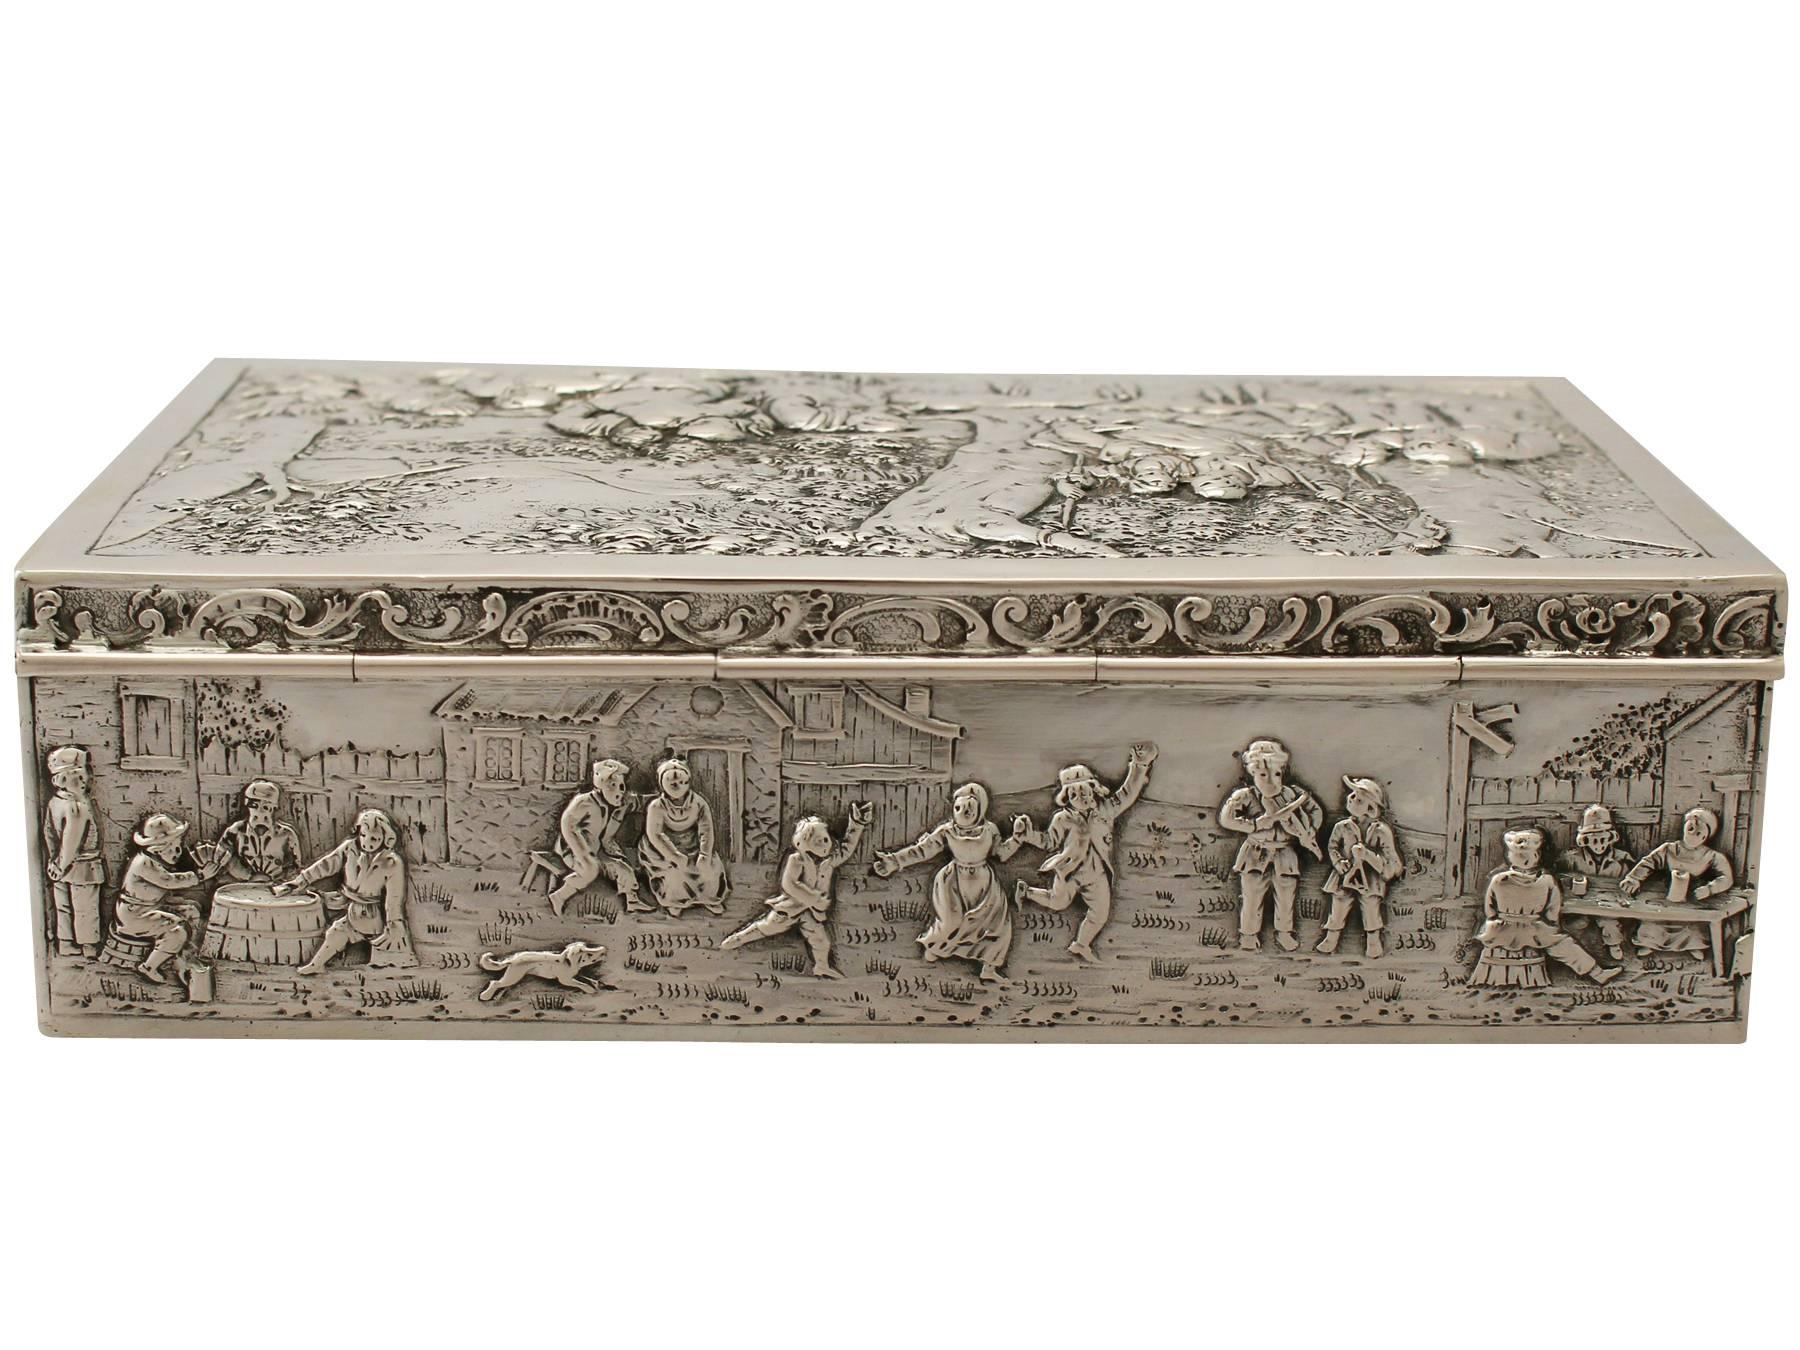 An exceptional, fine and impressive antique German silver jewelry box; an addition to our range of silver boxes and cases.

This exceptional antique German silver jewelry box has a plain rectangular form.

The surface of the body is embellished